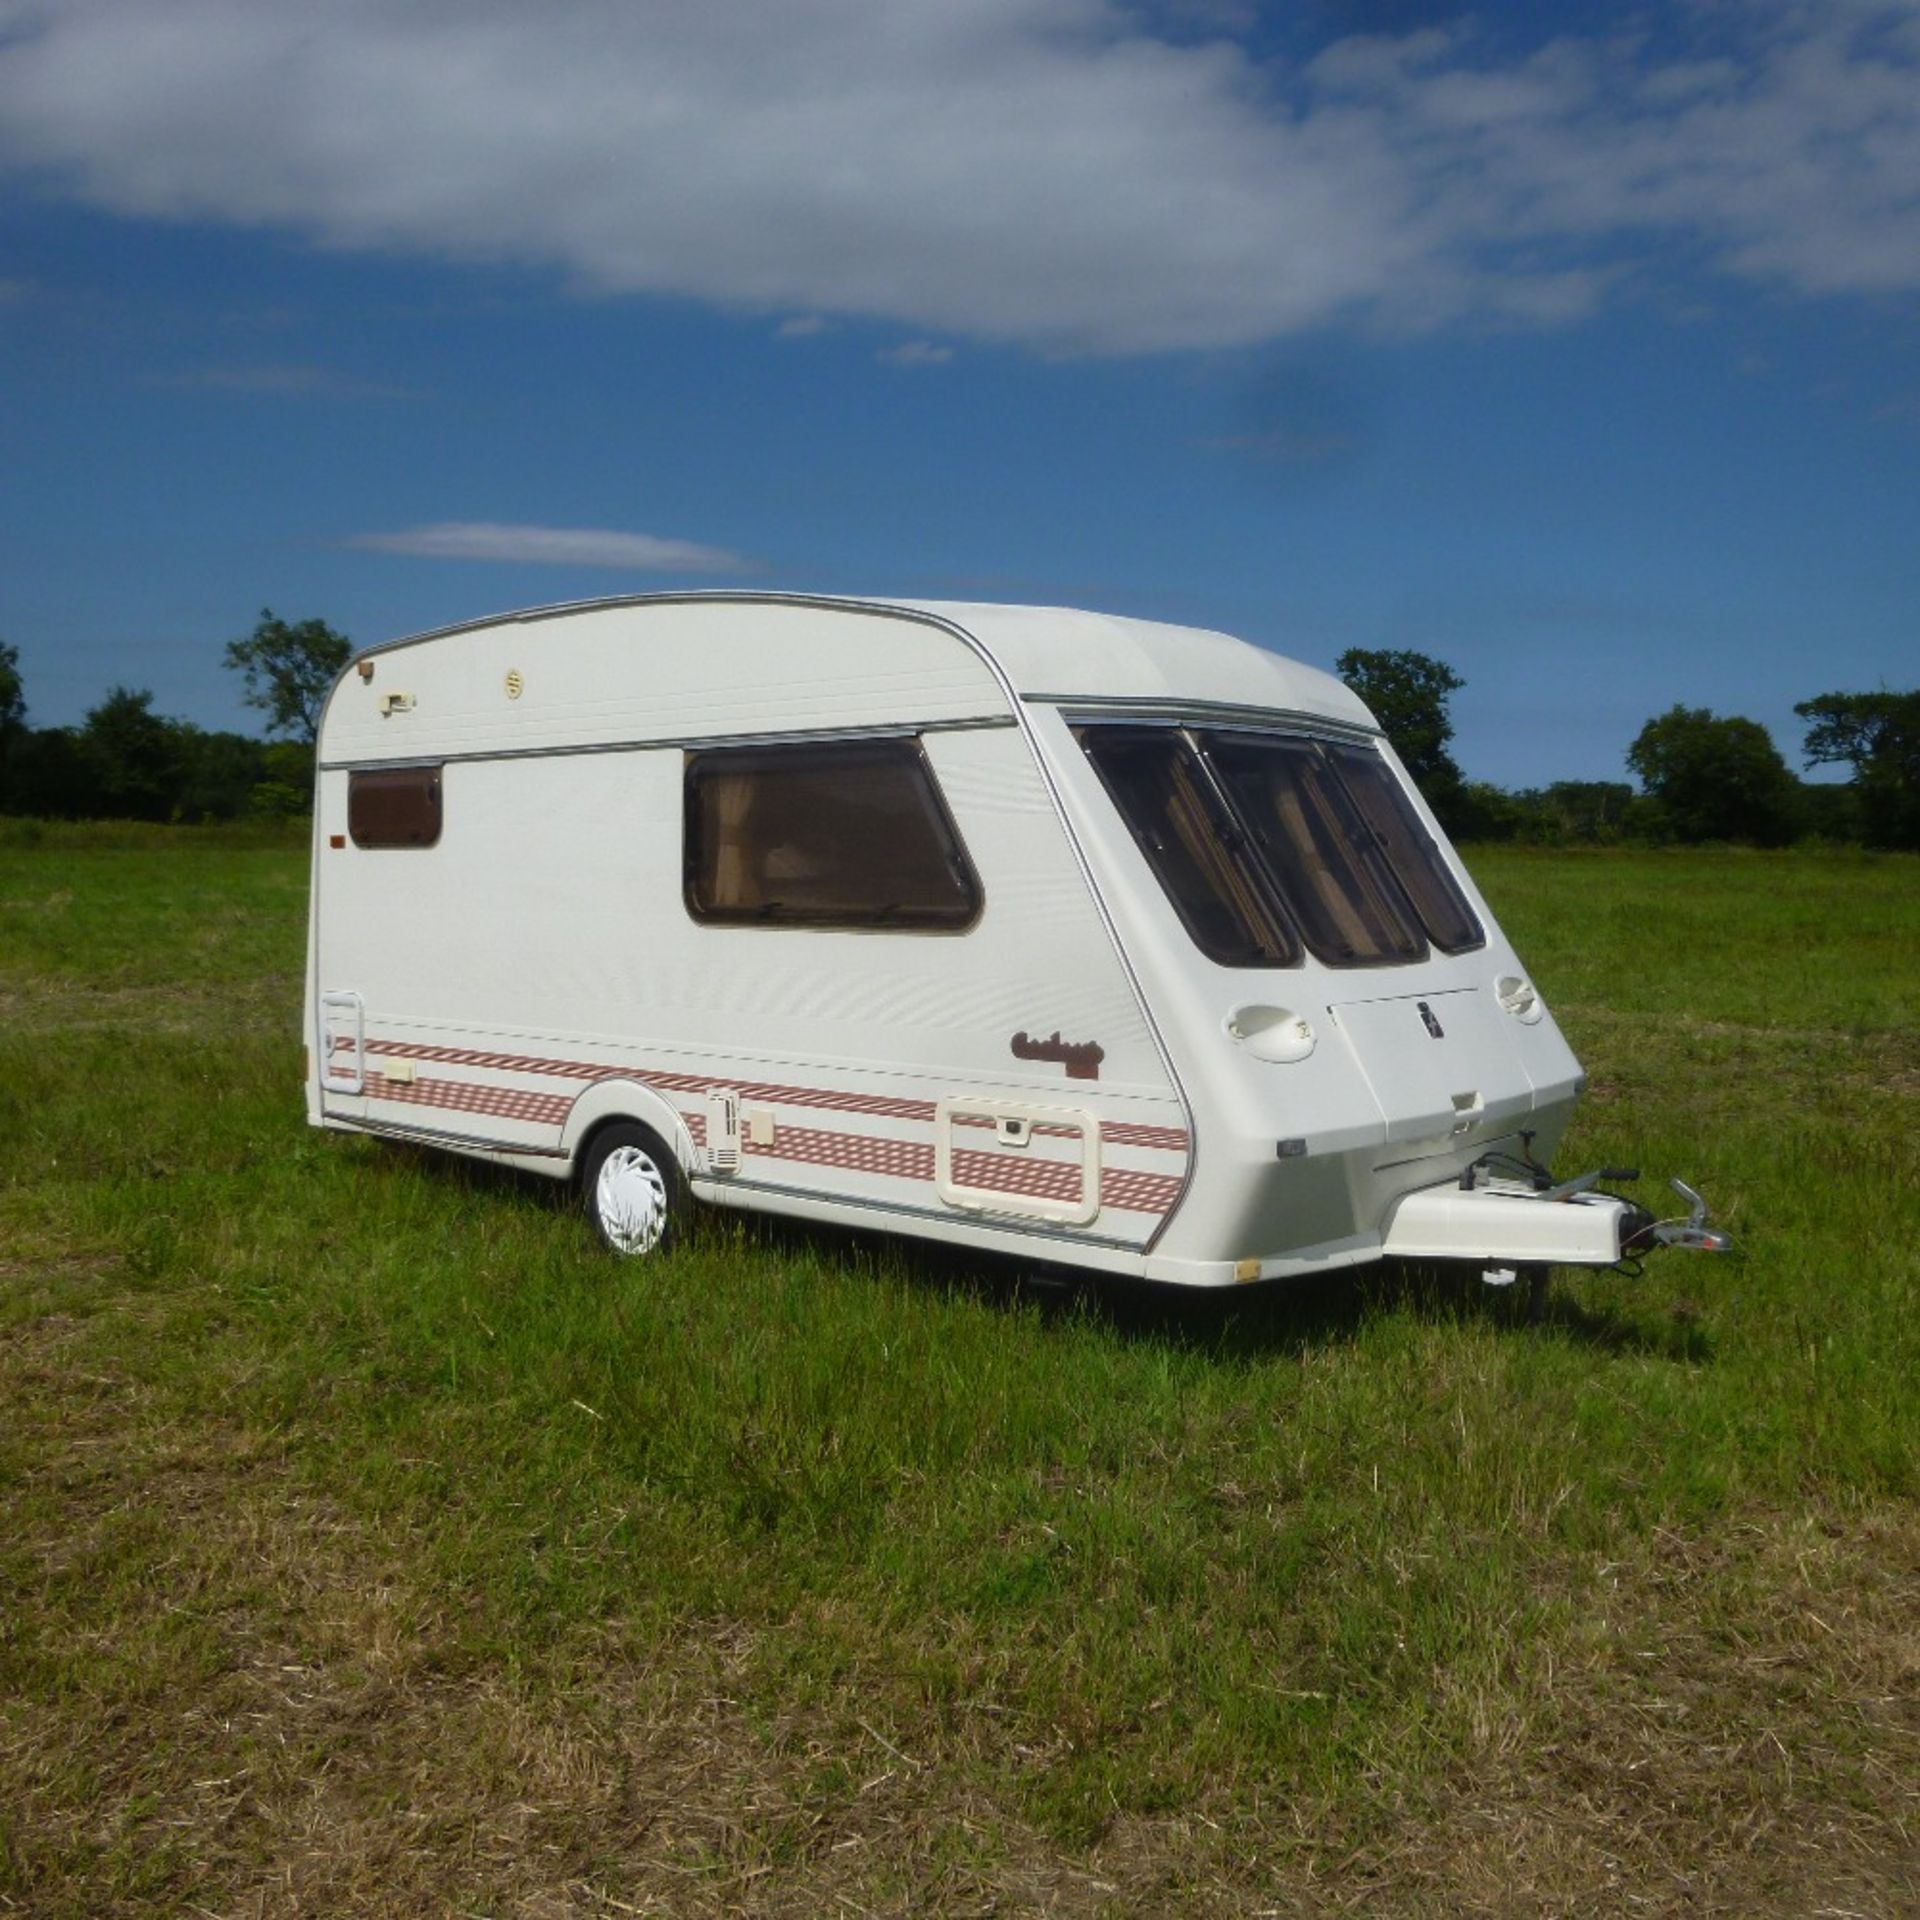 Caravan including two awnings and gas bottles